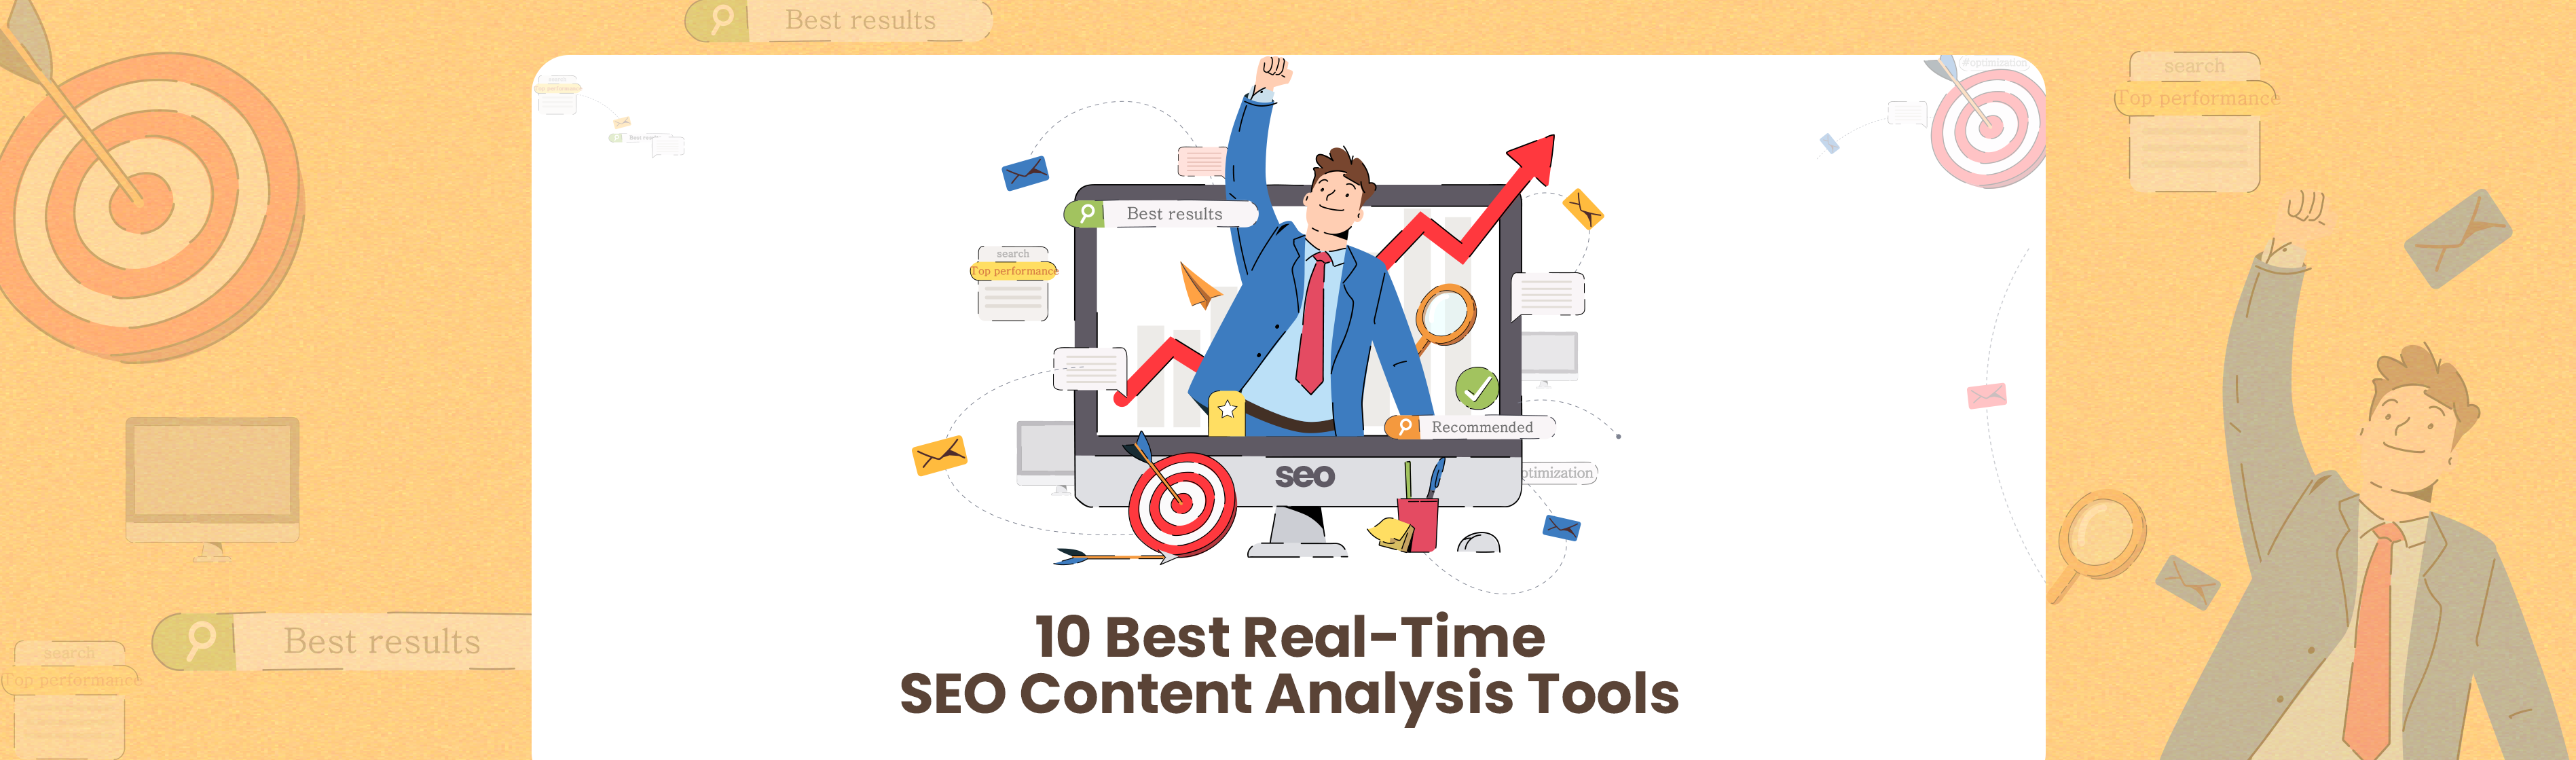 10 Best Real-Time SEO Content Analysis Tools